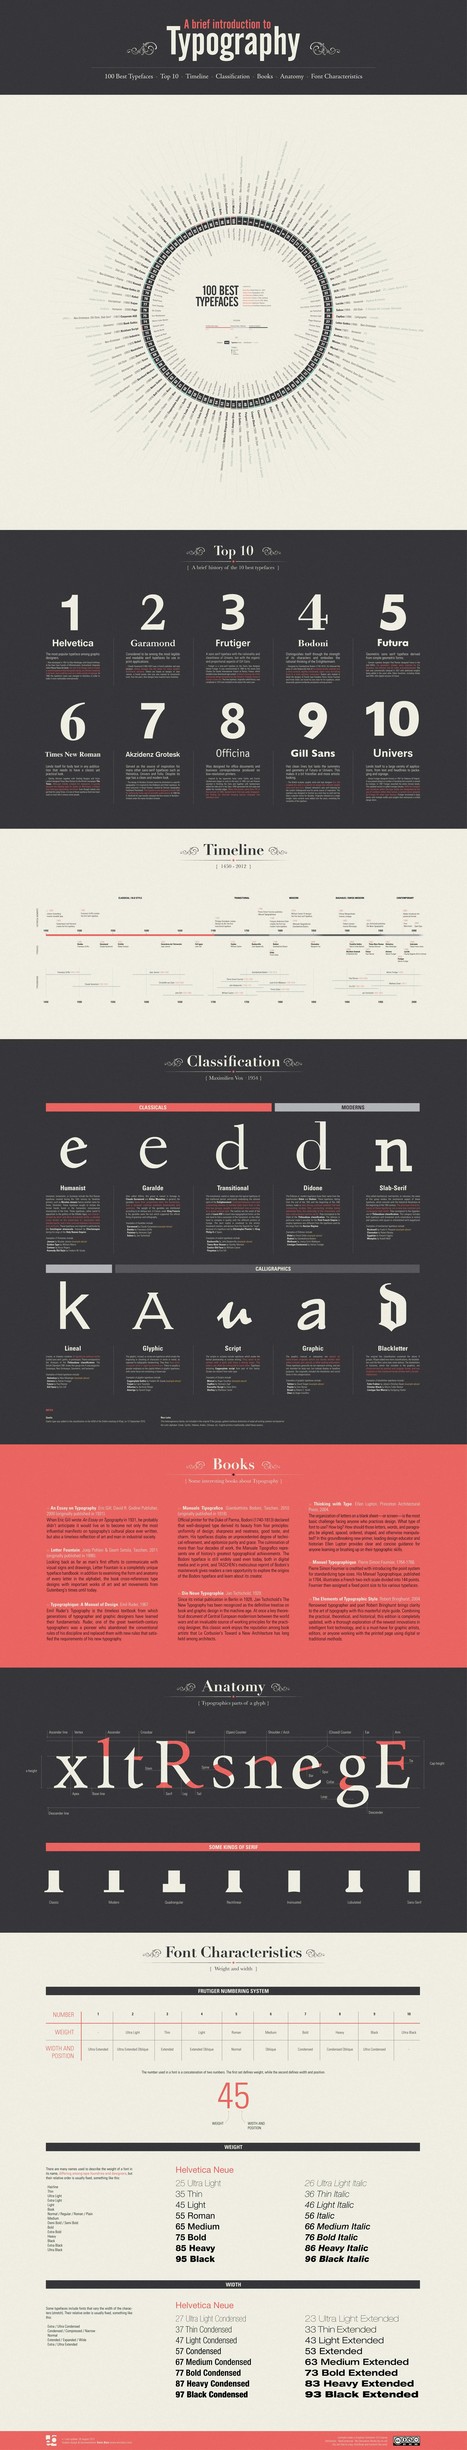 A Brief Introduction to Typography – Infographic | Design, Science and Technology | Scoop.it